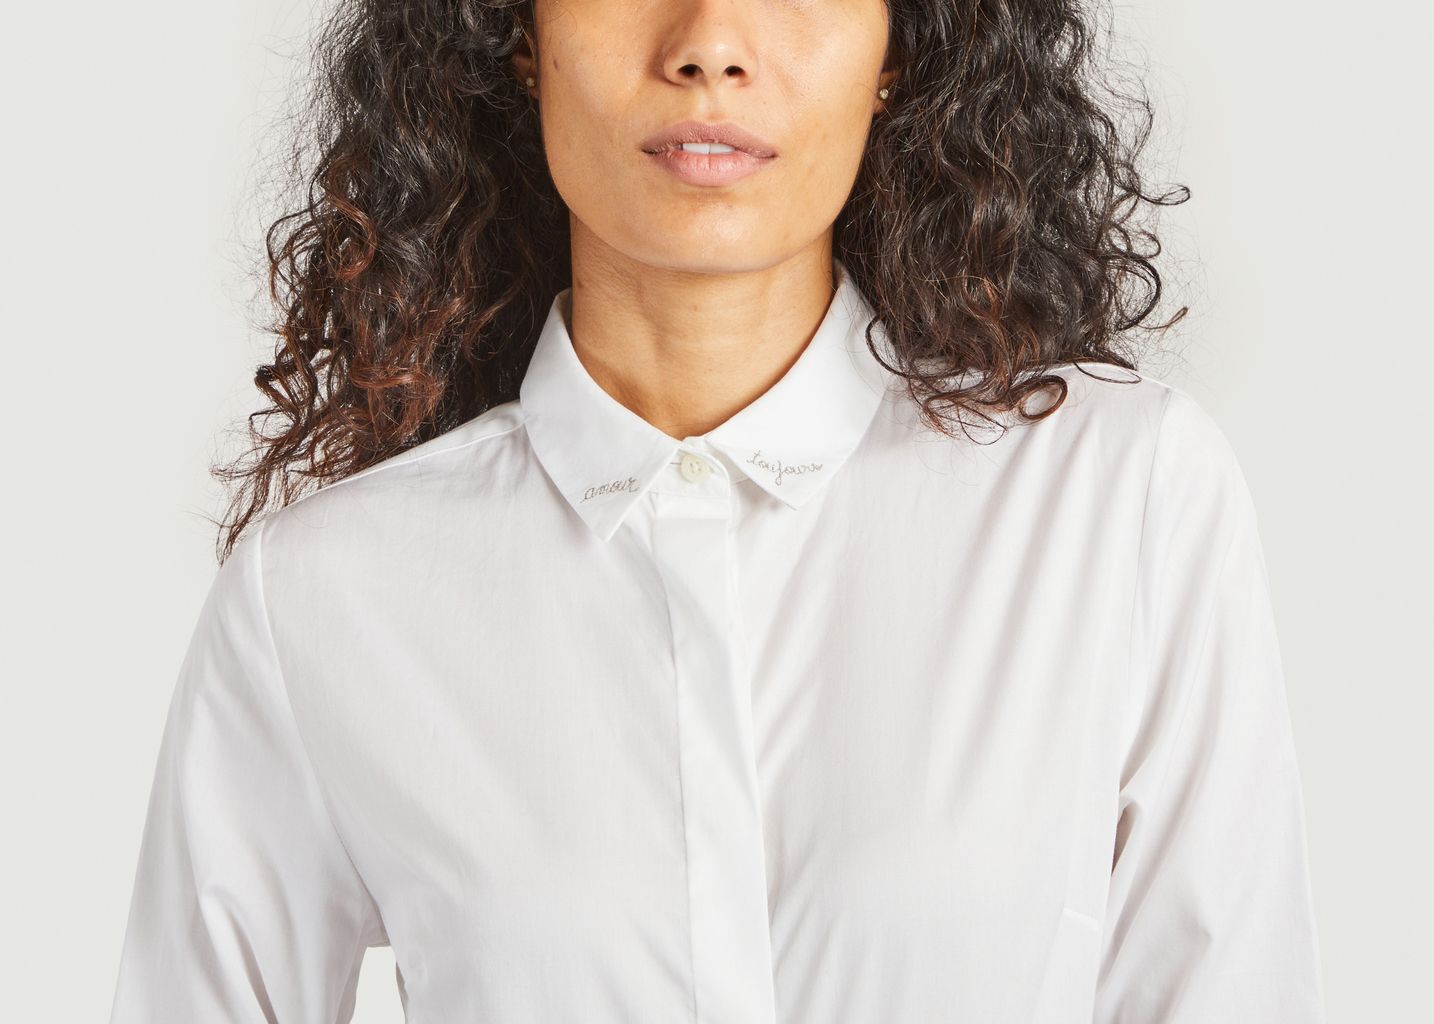 Love Forever Temple embroidered shirt - Maison Labiche